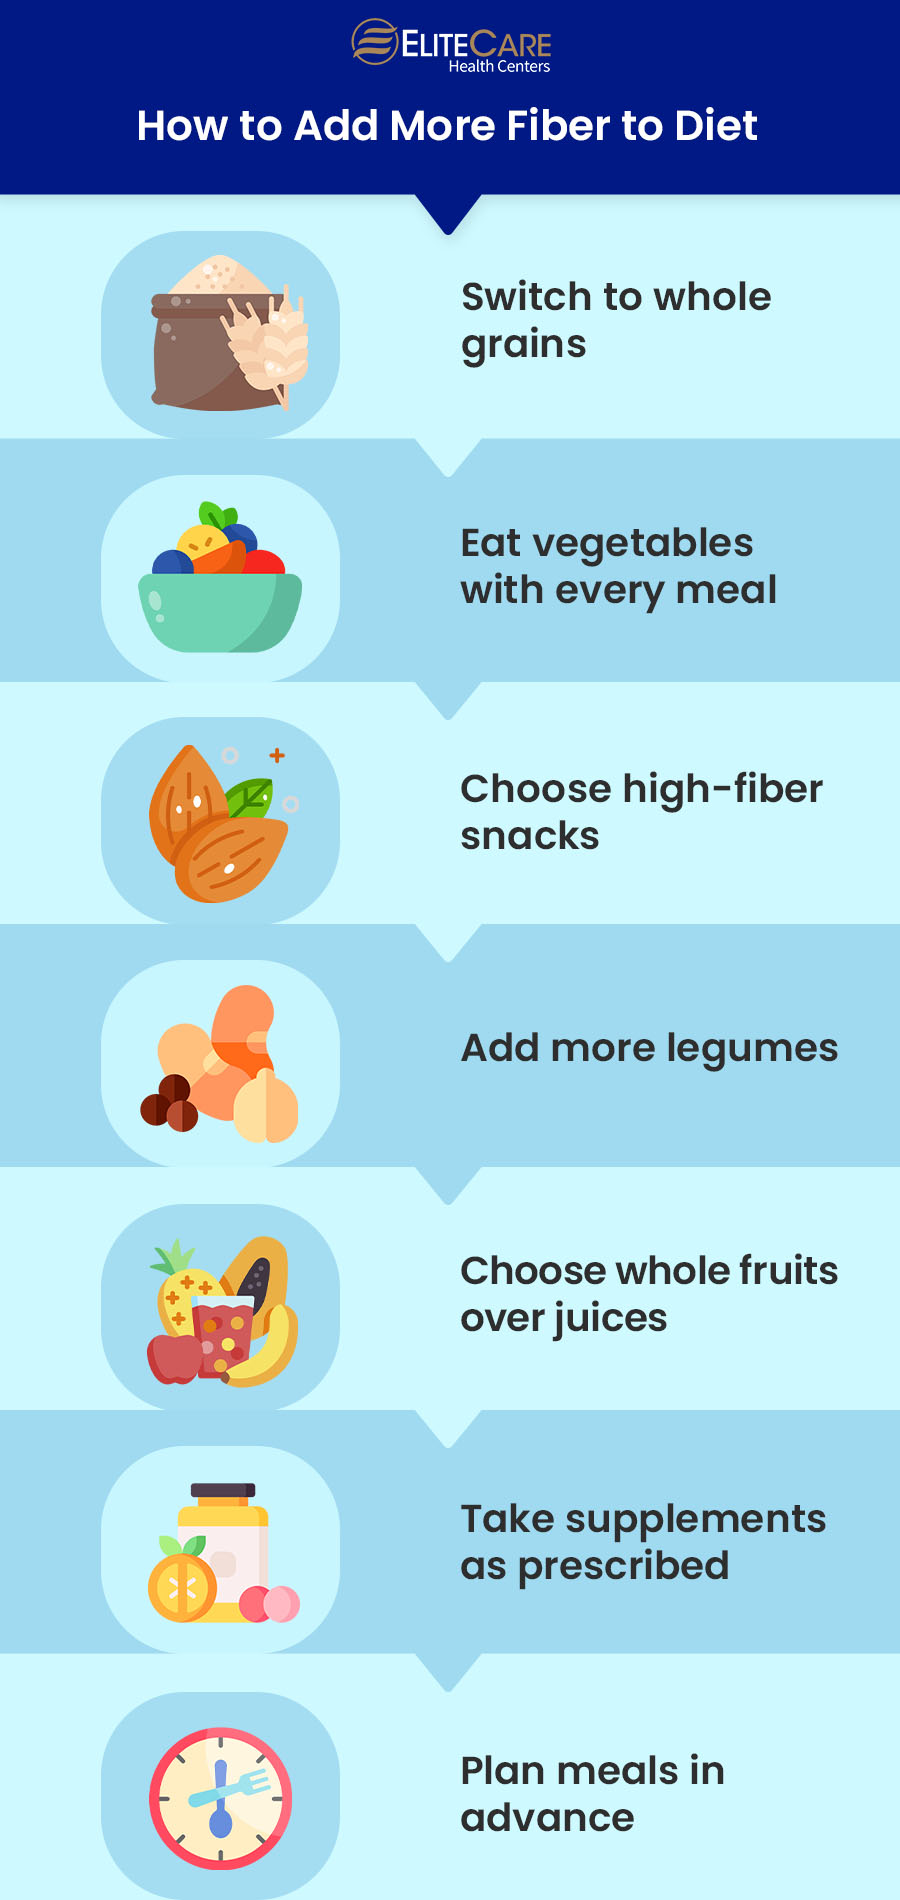 How to Add More Fiber to Diet